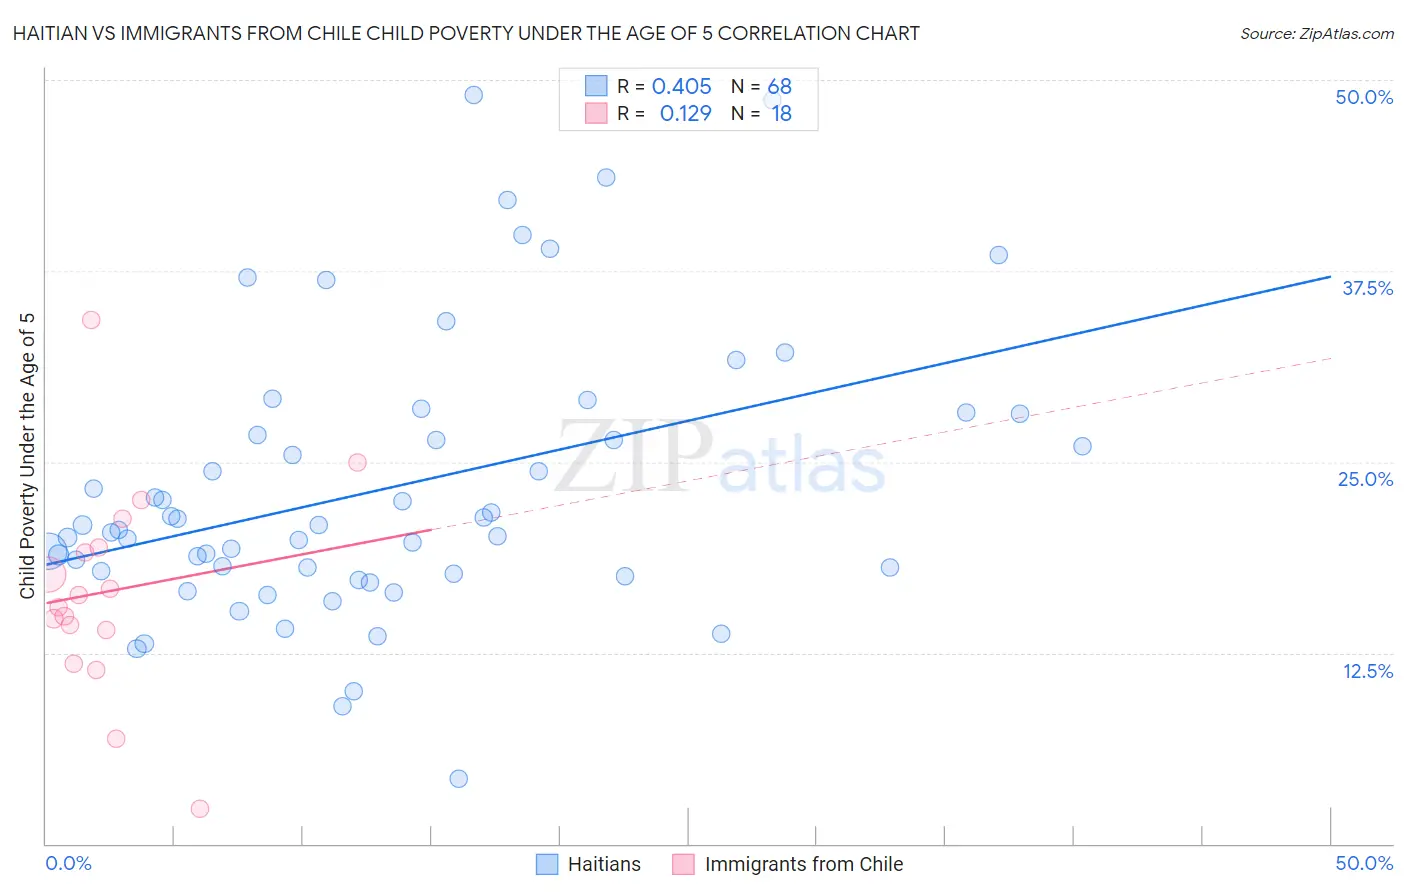 Haitian vs Immigrants from Chile Child Poverty Under the Age of 5